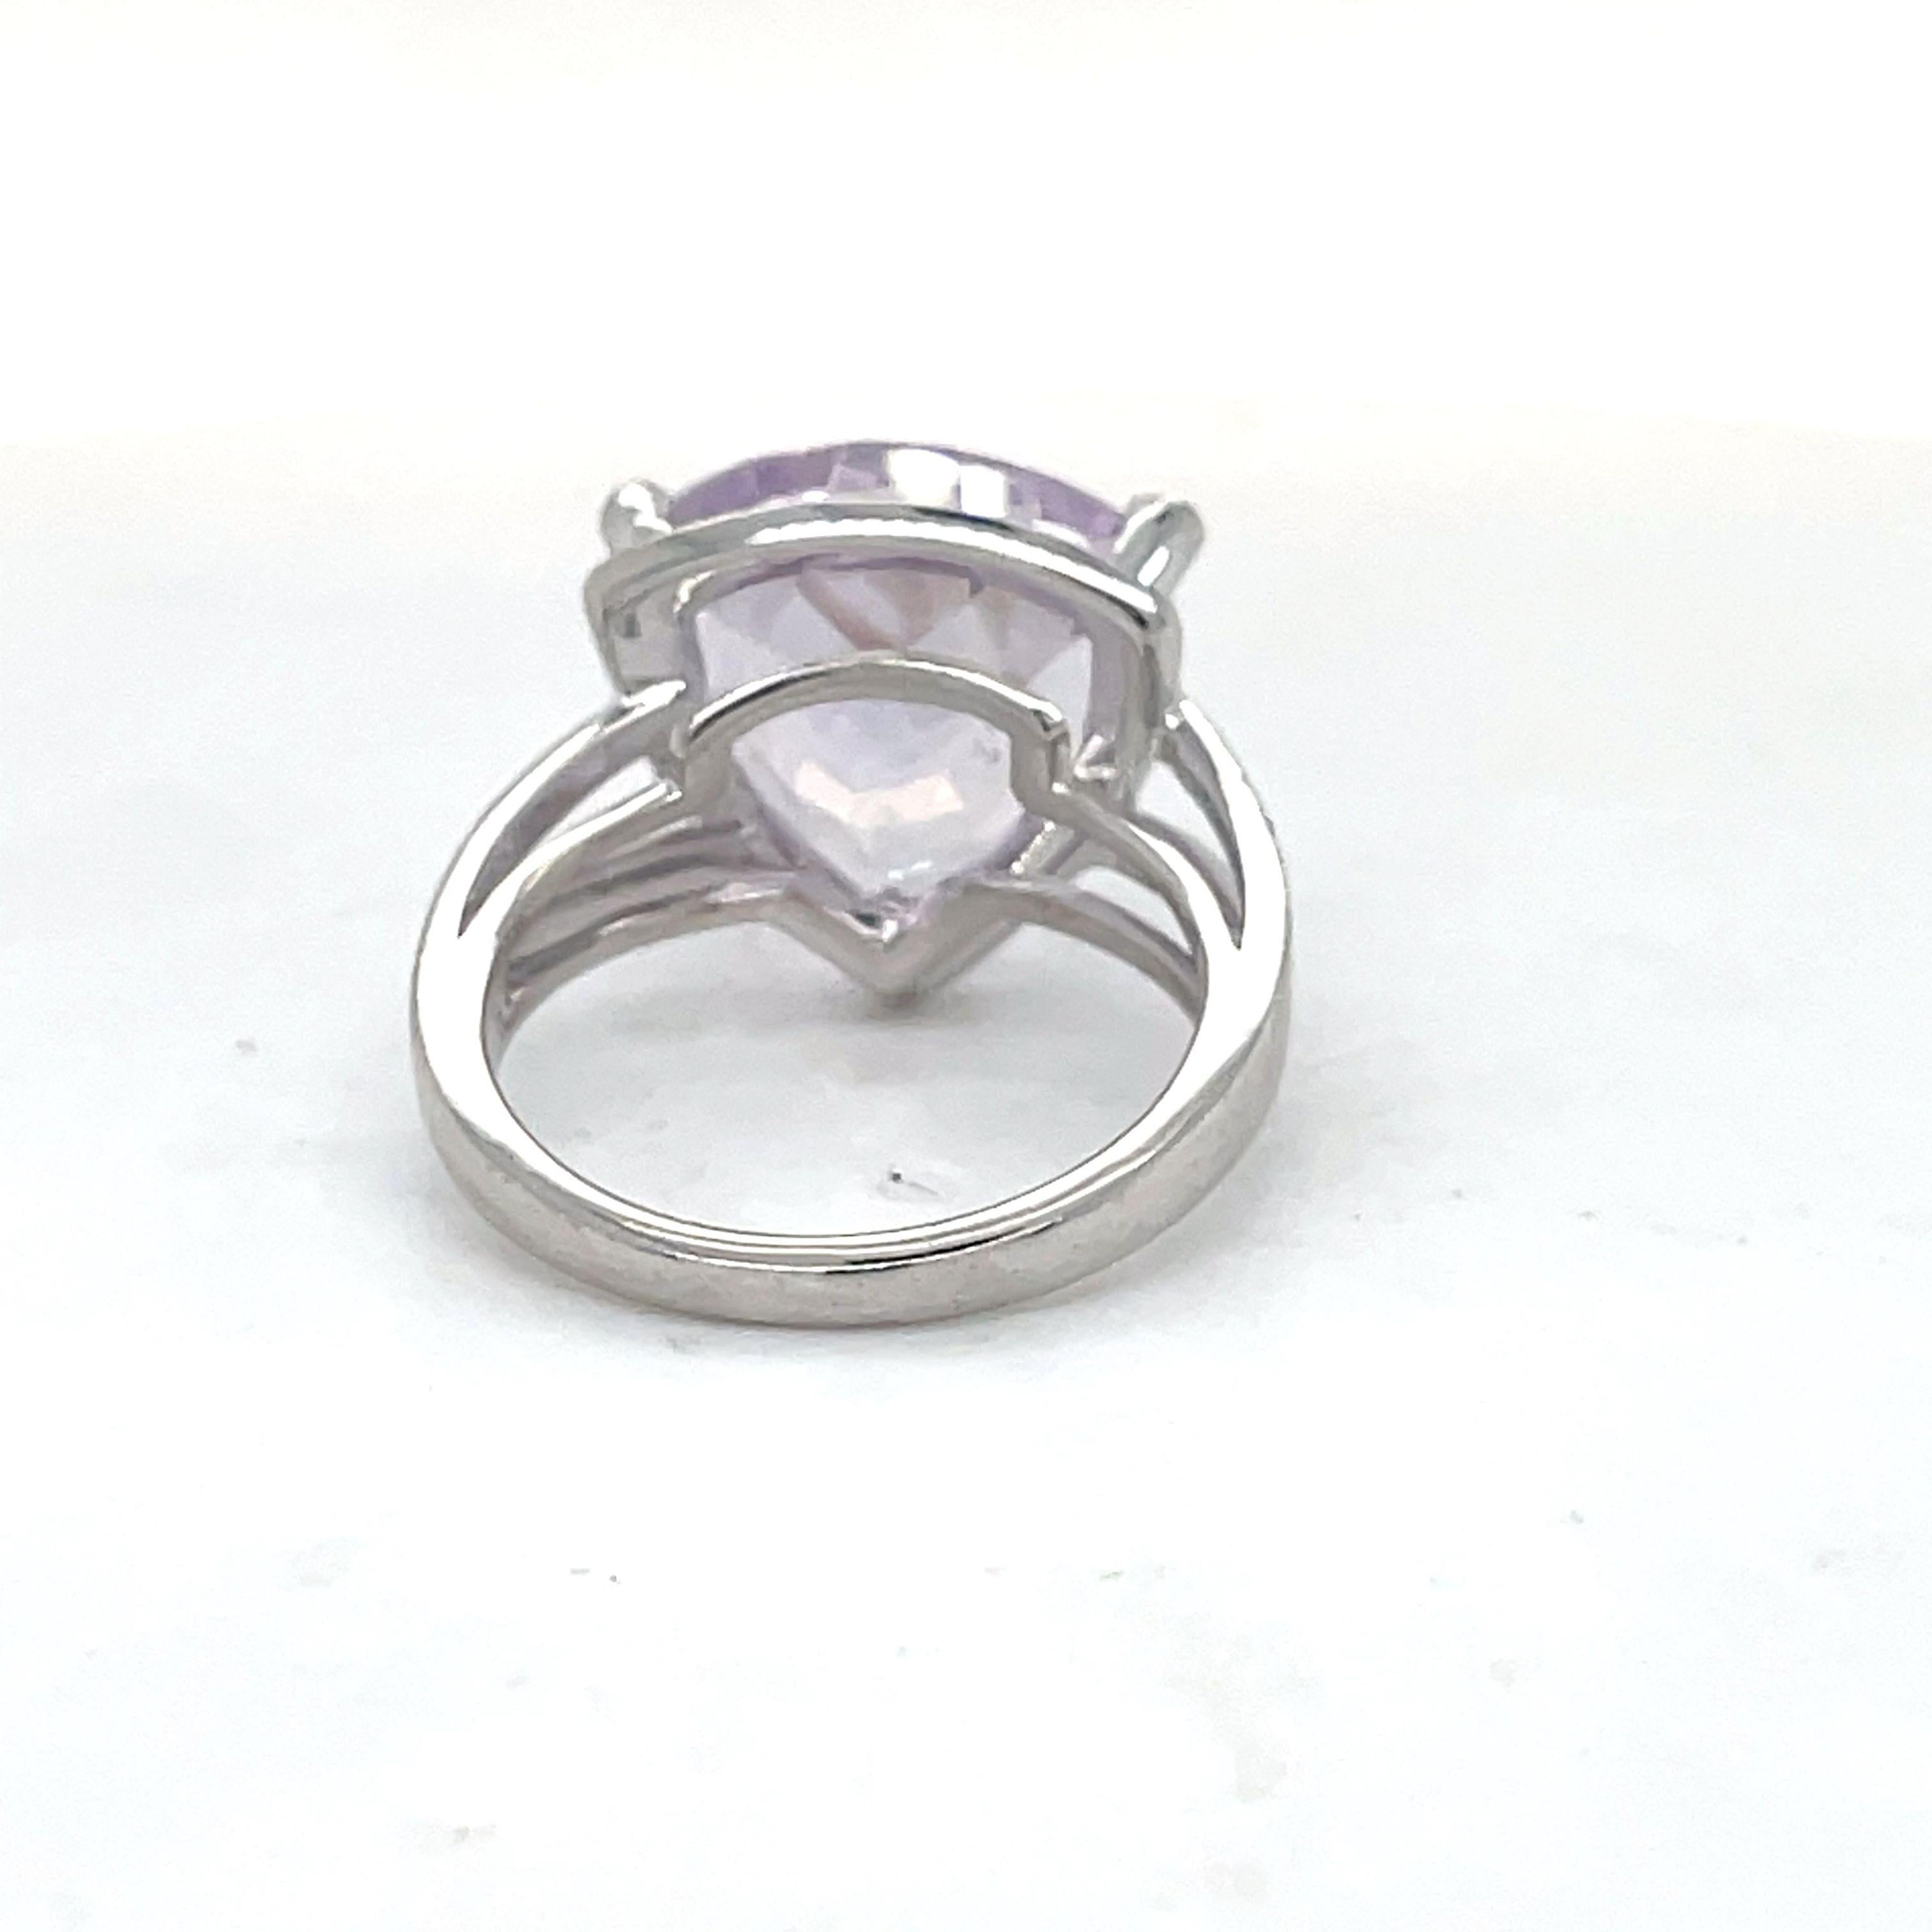 Mouboussin Cocktail Ring - Mes Couleurs À Toi, 5CT France rose Amatyst ring For Sale 6